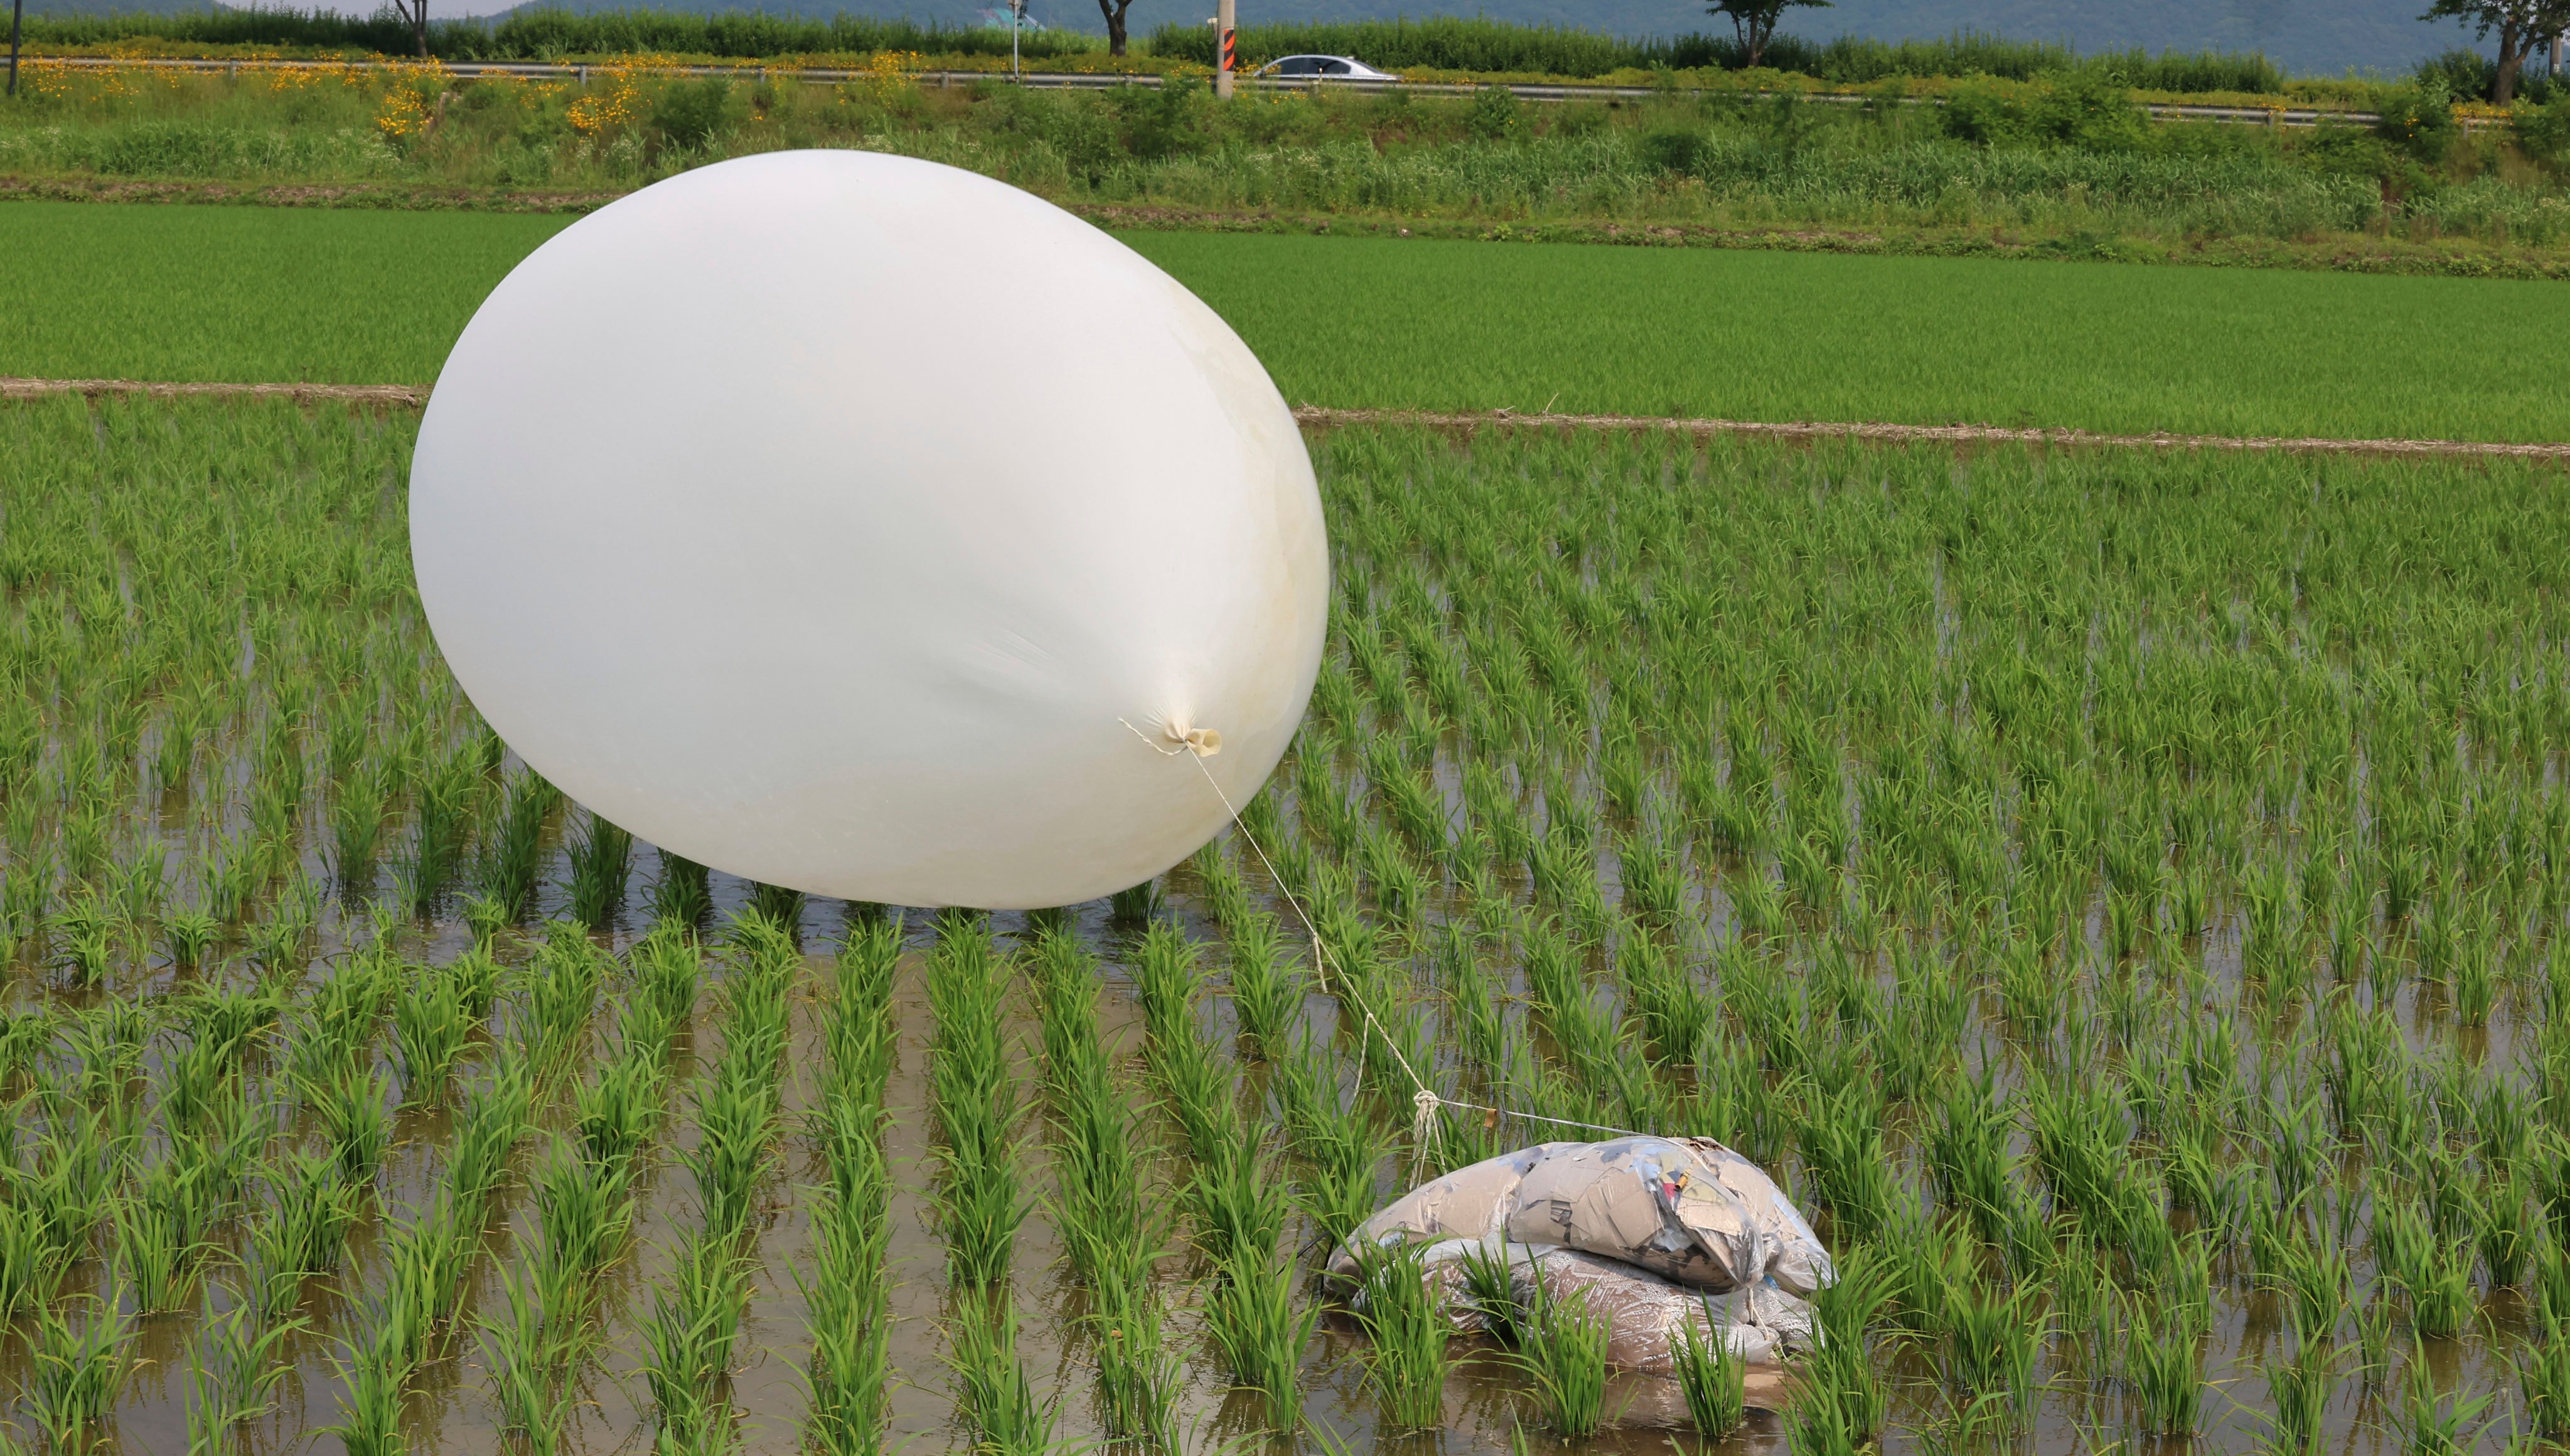 A balloon presumably sent by North Korea, is seen in a paddy field in Incheon, South Korea, on June 10. Photo: AP